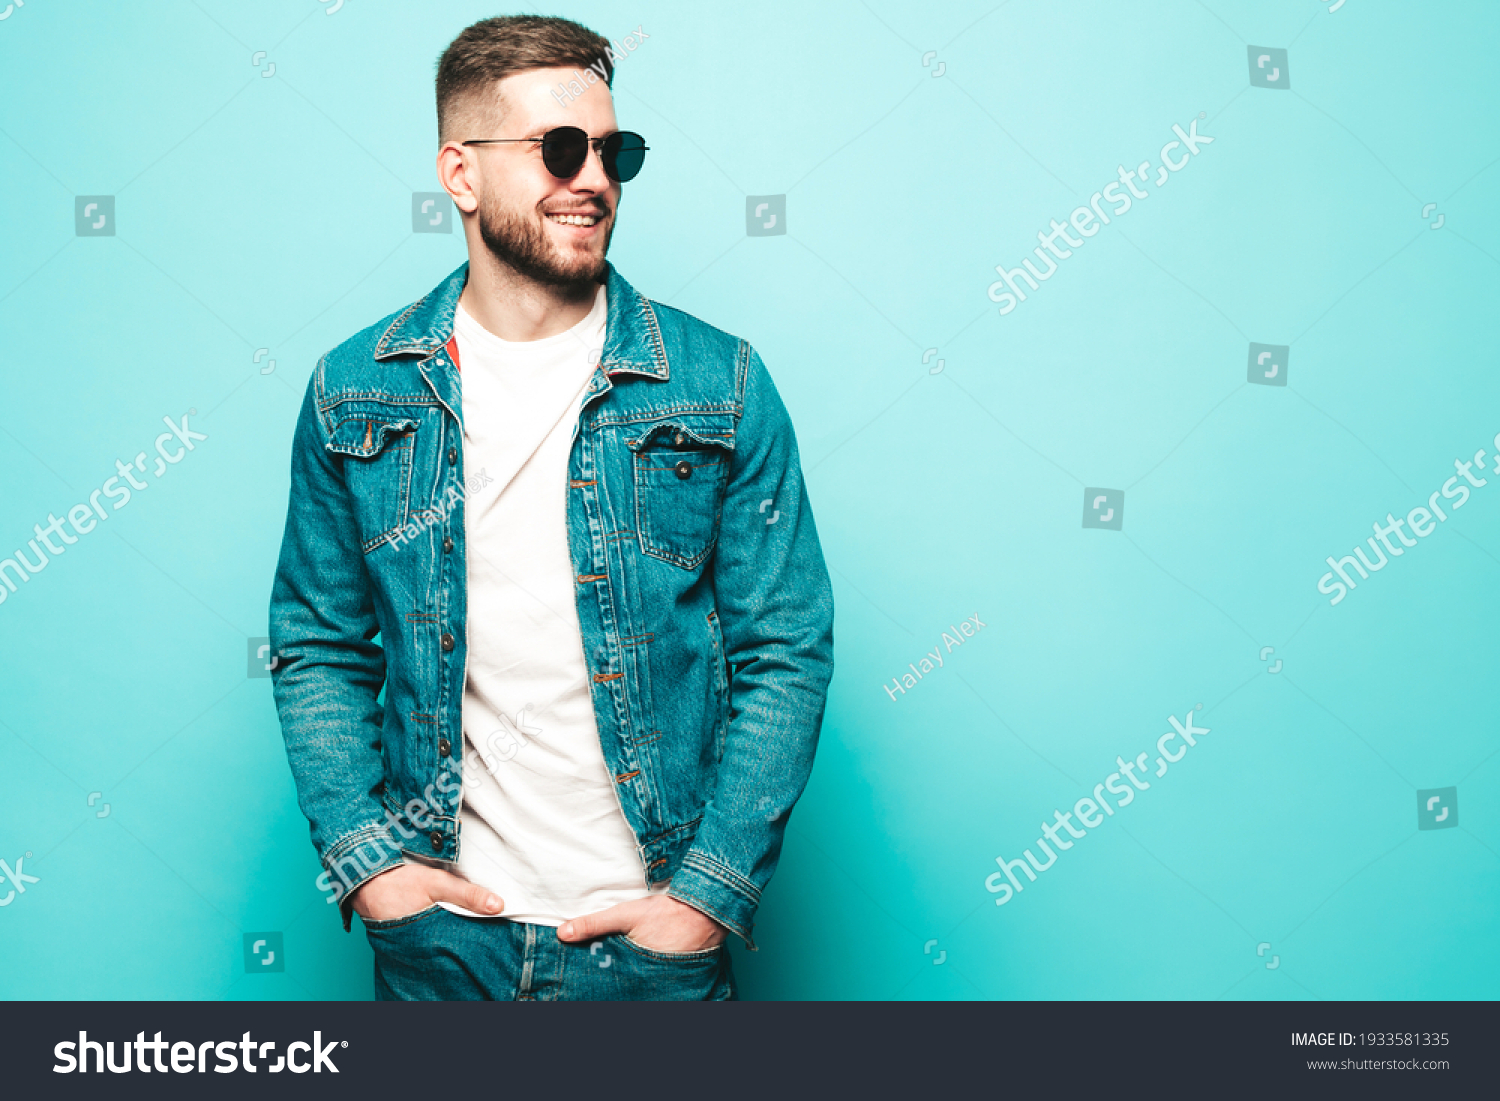 Portrait of handsome smiling stylish hipster lambersexual model.Man dressed in jacket and jeans. Fashion male posing near blue wall in studio in sunglasses #1933581335